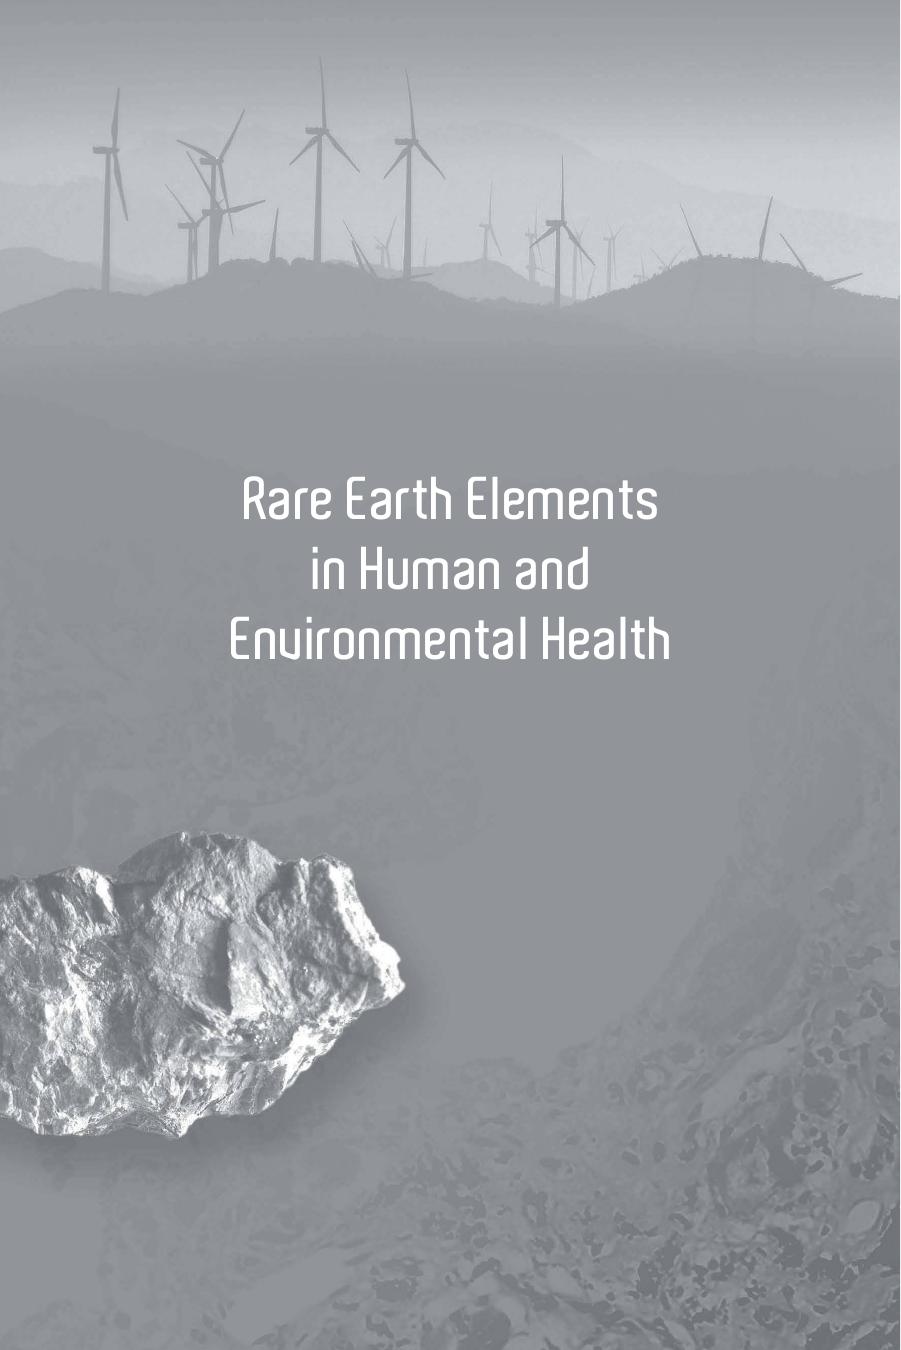 Rare Earth Elements in Human and Environmental Health  At the Crossroads Between Toxicity and Safety (2018)